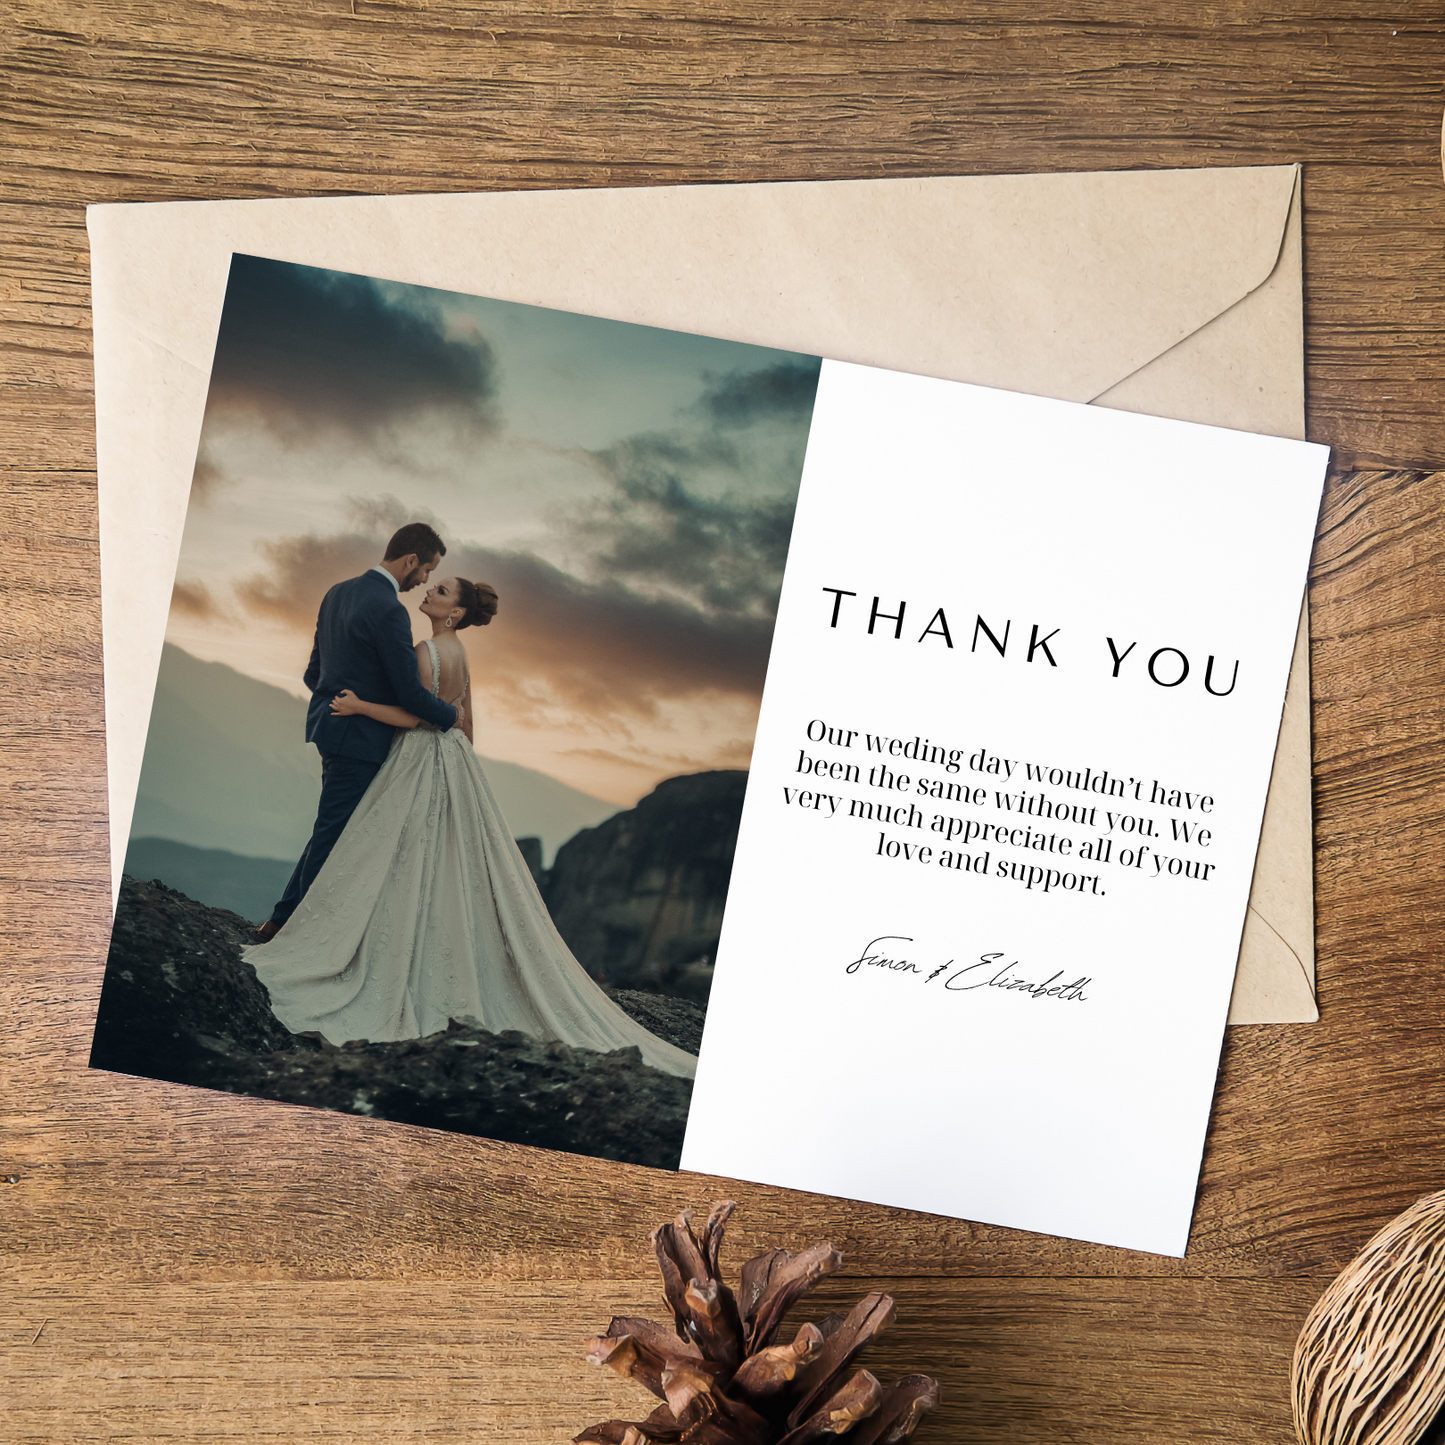 A wedding thank you card lays on top of a light brown envelope on a wooden background. A  pinecone can be seen peaking out from the bottom of the image.